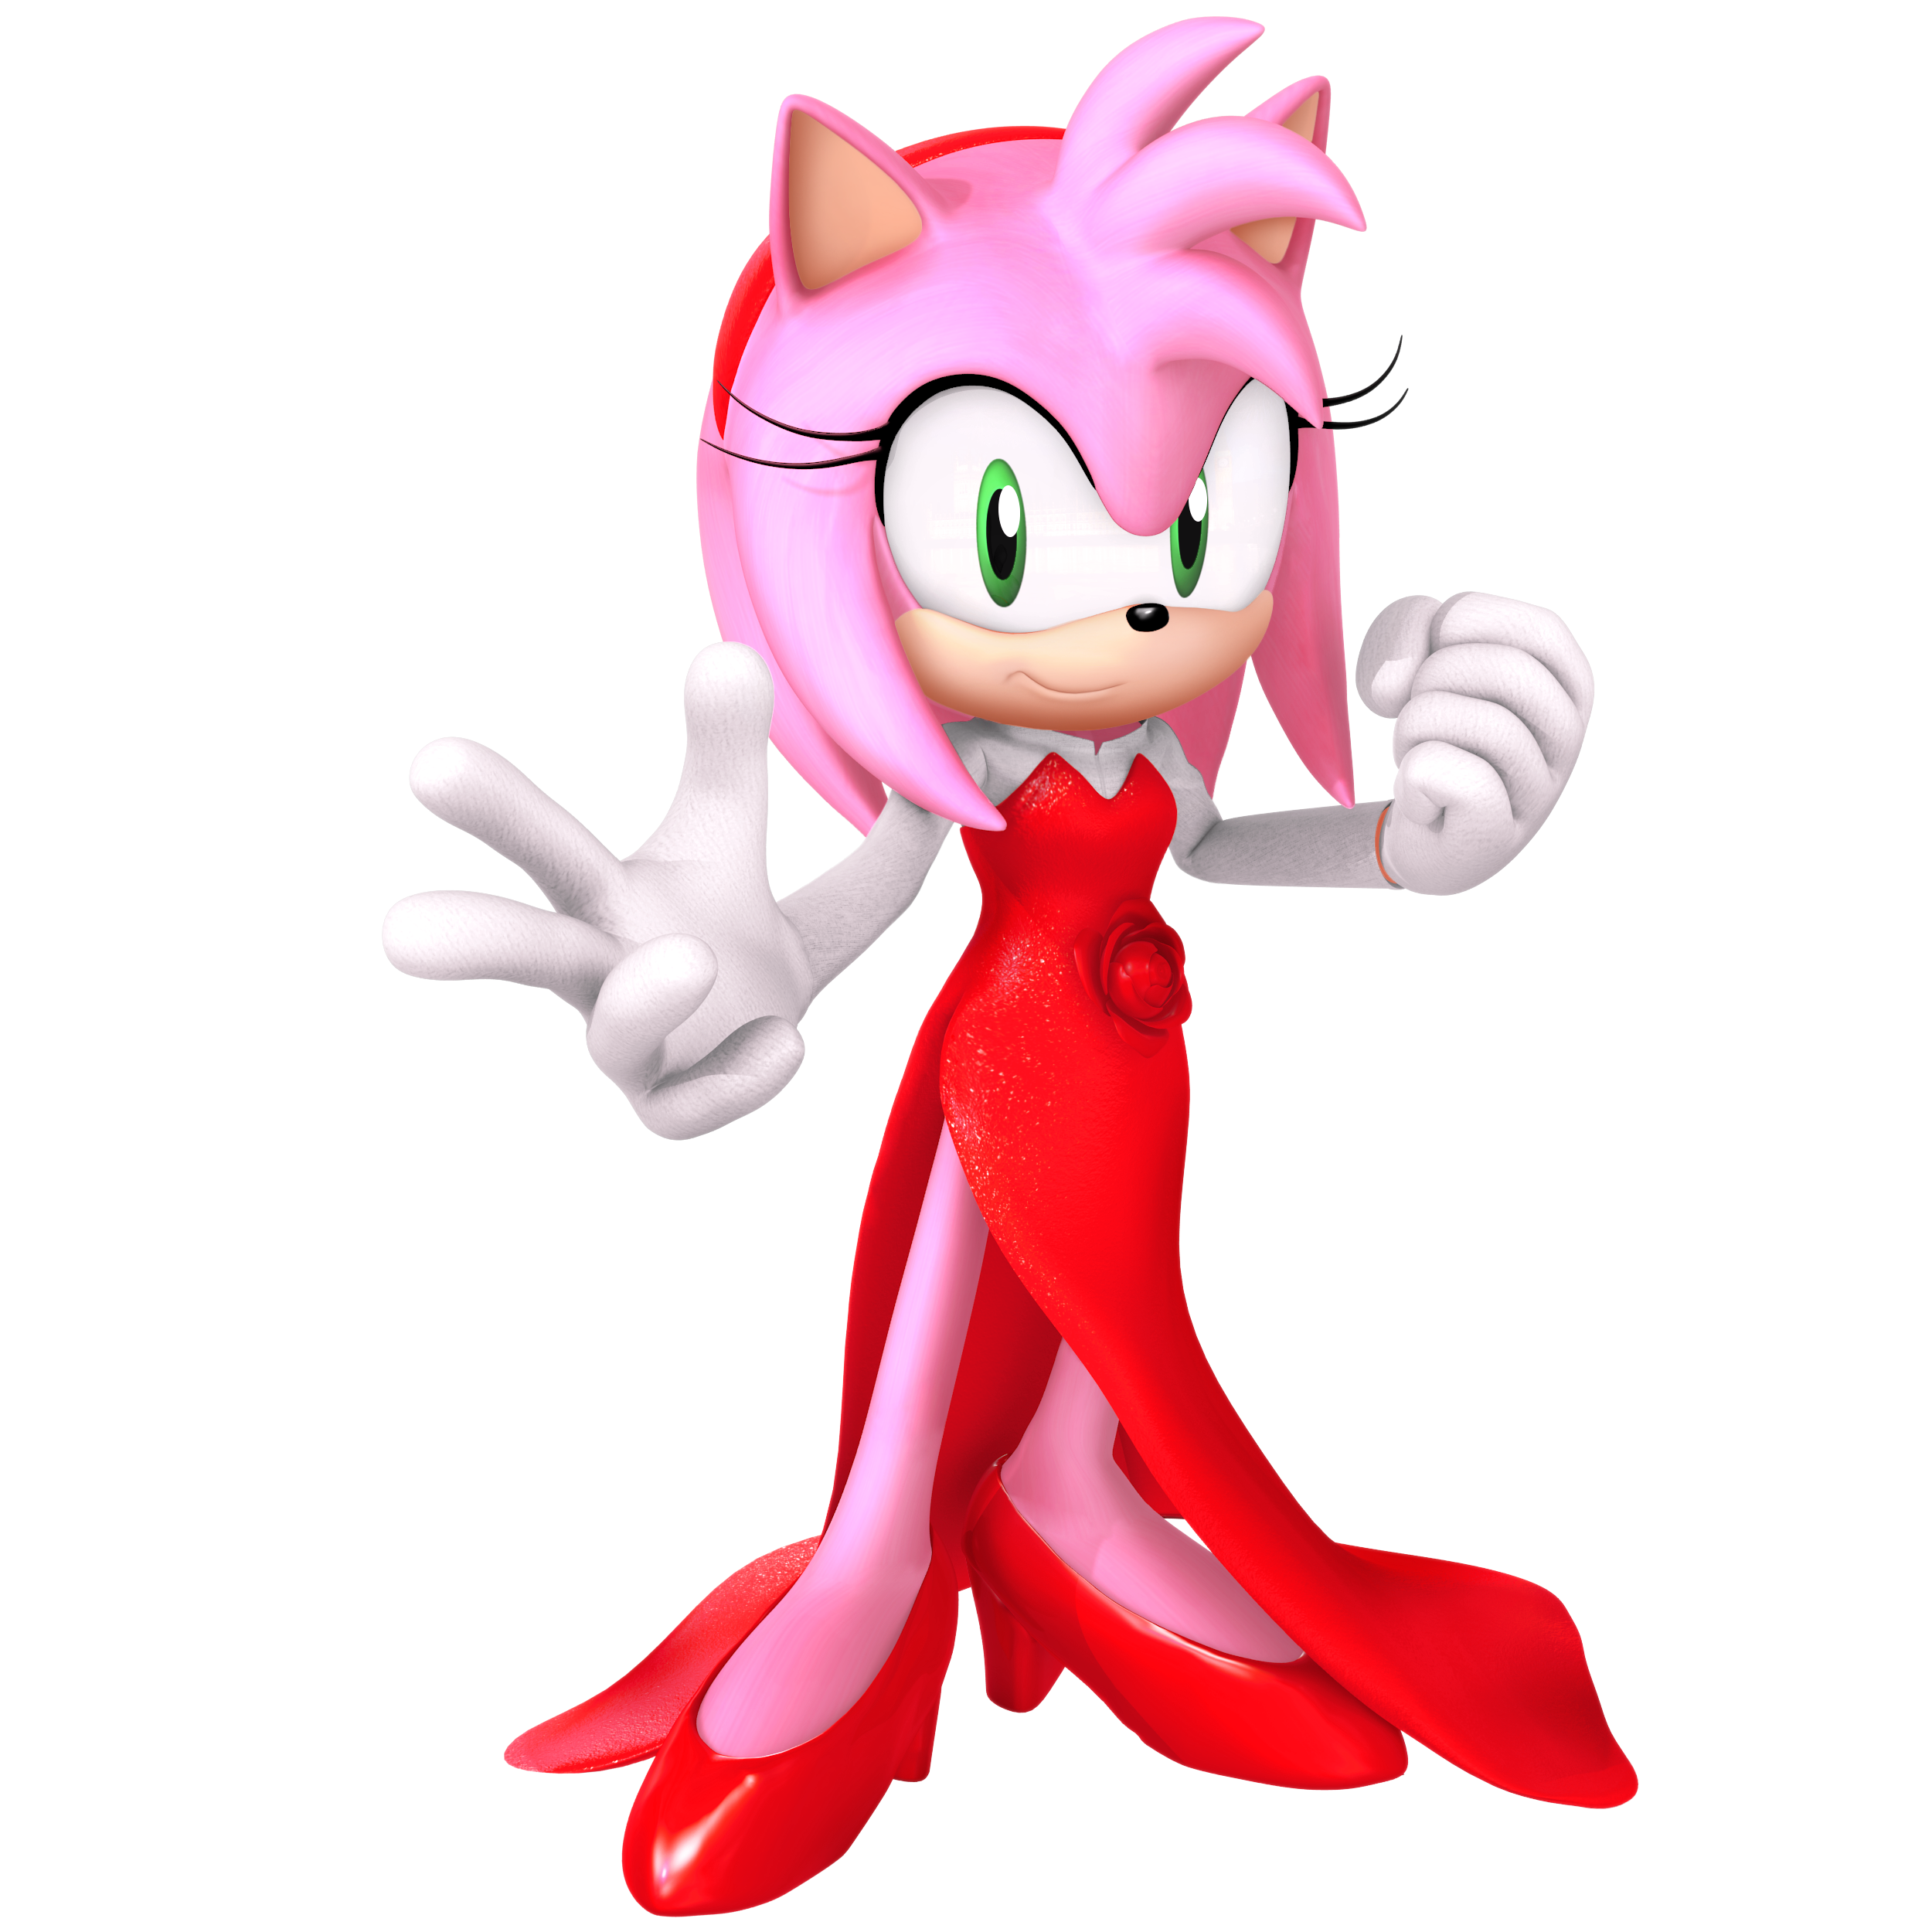 New Years Render 2021: Rose Dress Amy by Nibroc-Rock on DeviantArt